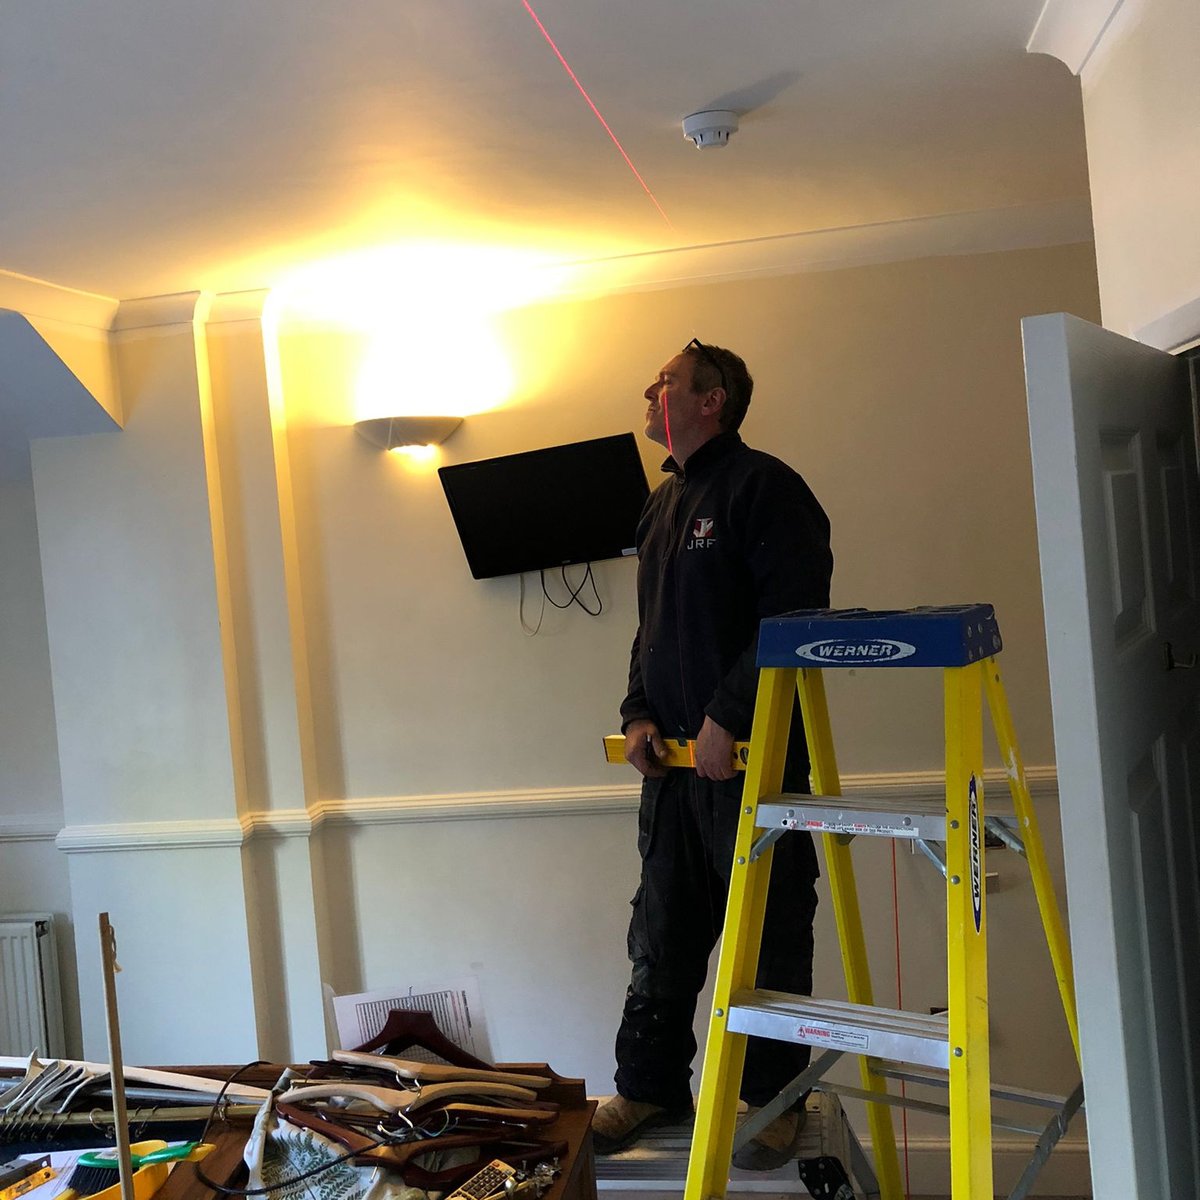 Our room refurbishment is underway. Special mention to @jrfdevelopments for quality service. Watch this space. #burystedmunds #craftsmen #suffolkbusiness 🔨